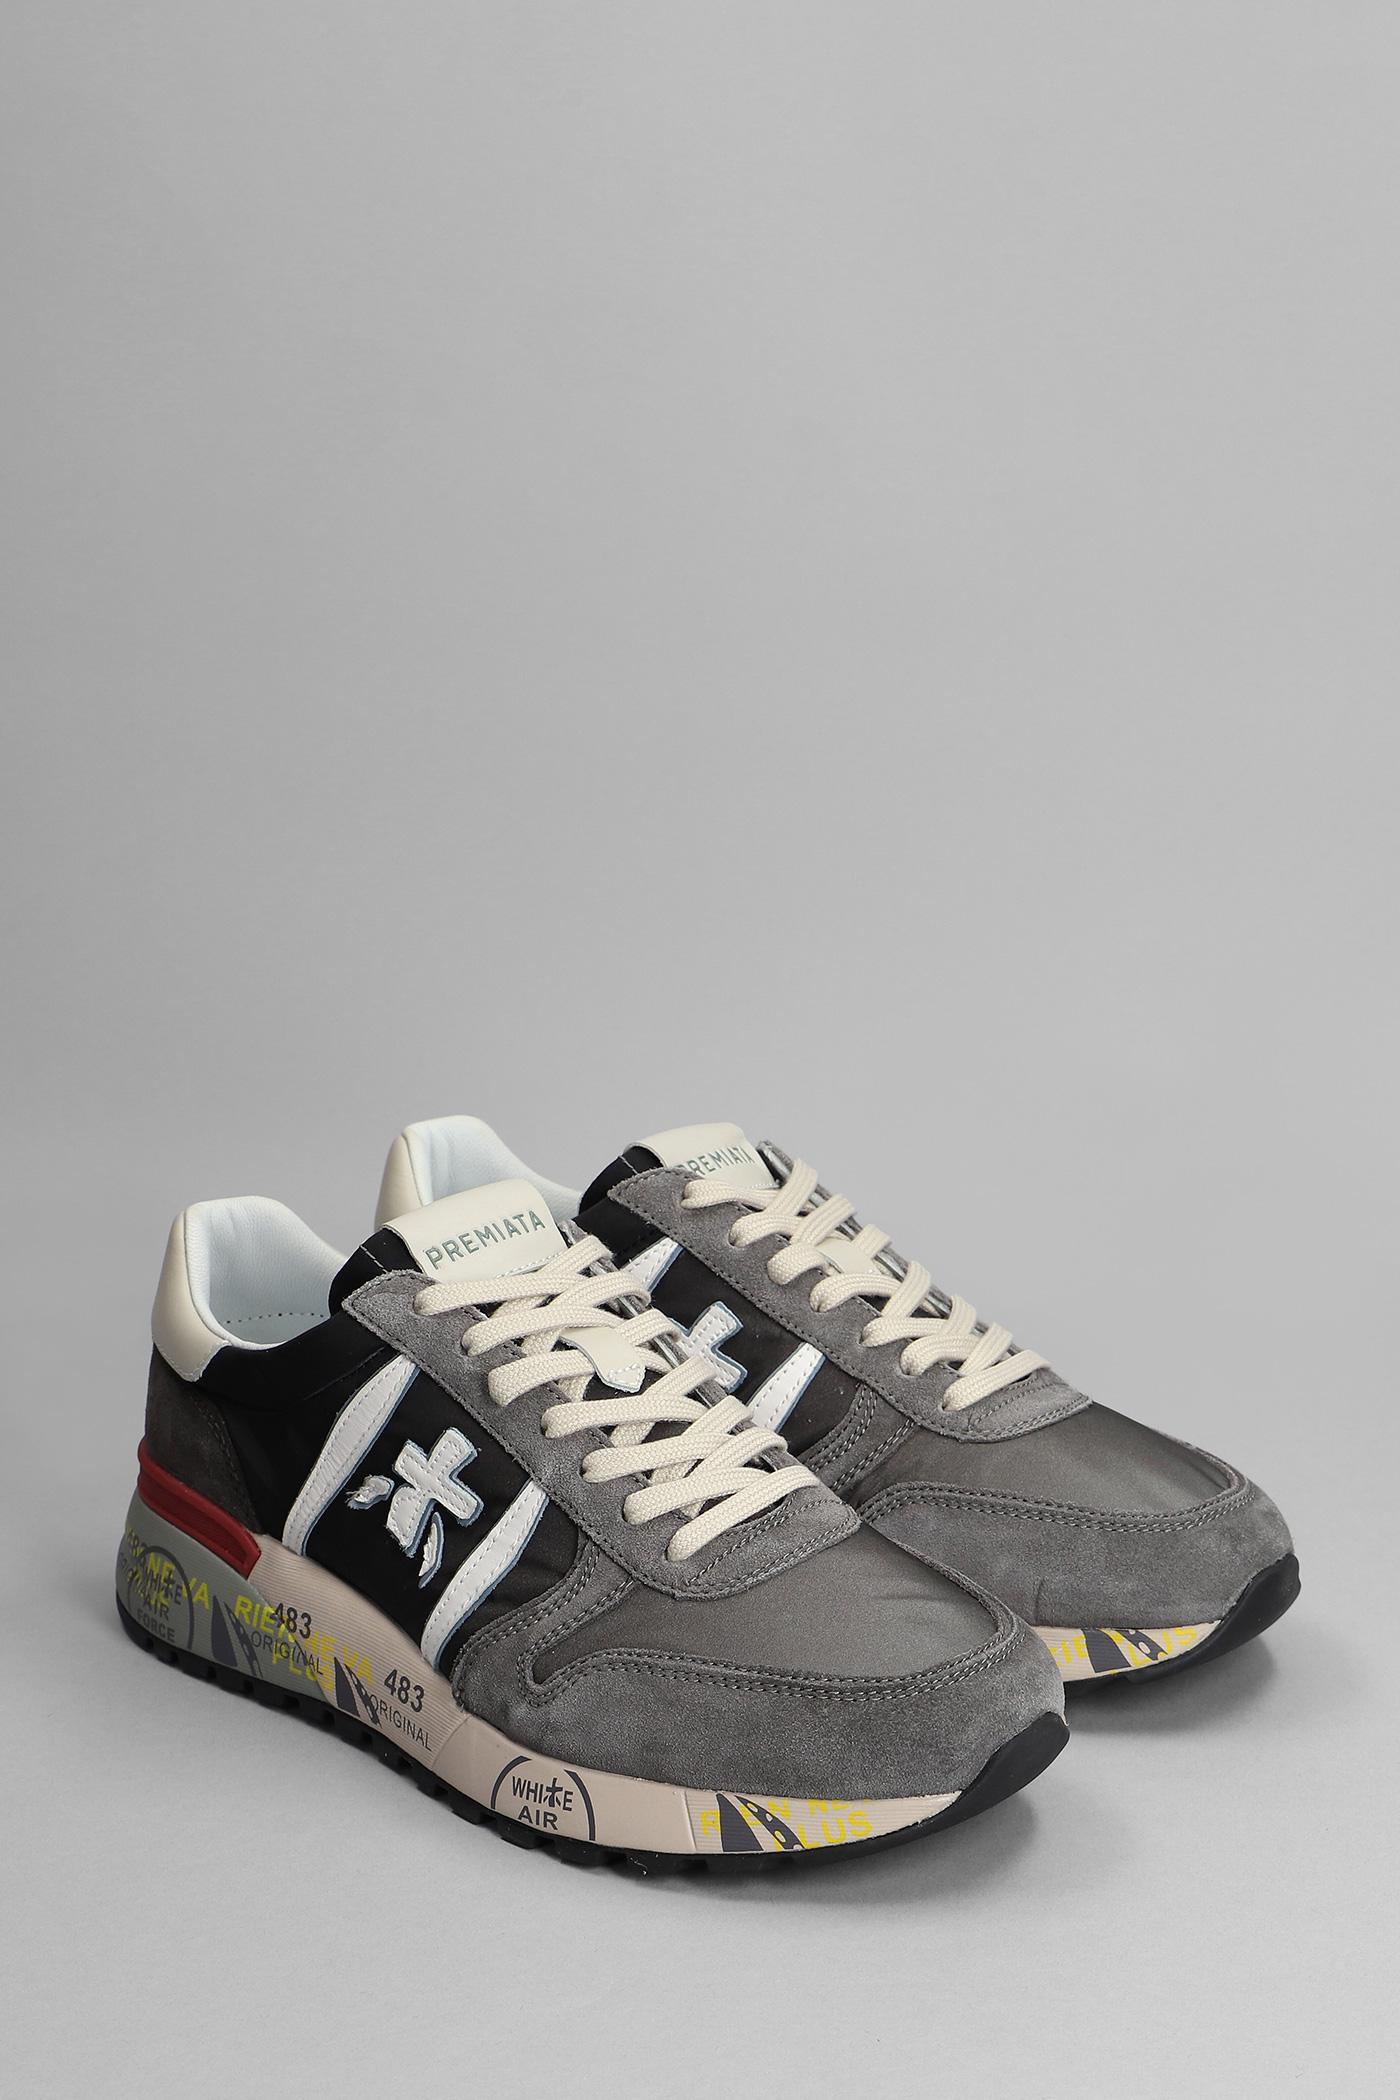 Premiata Lander Sneakers In Grey Suede And Fabric in Gray for Men - Save  11% | Lyst